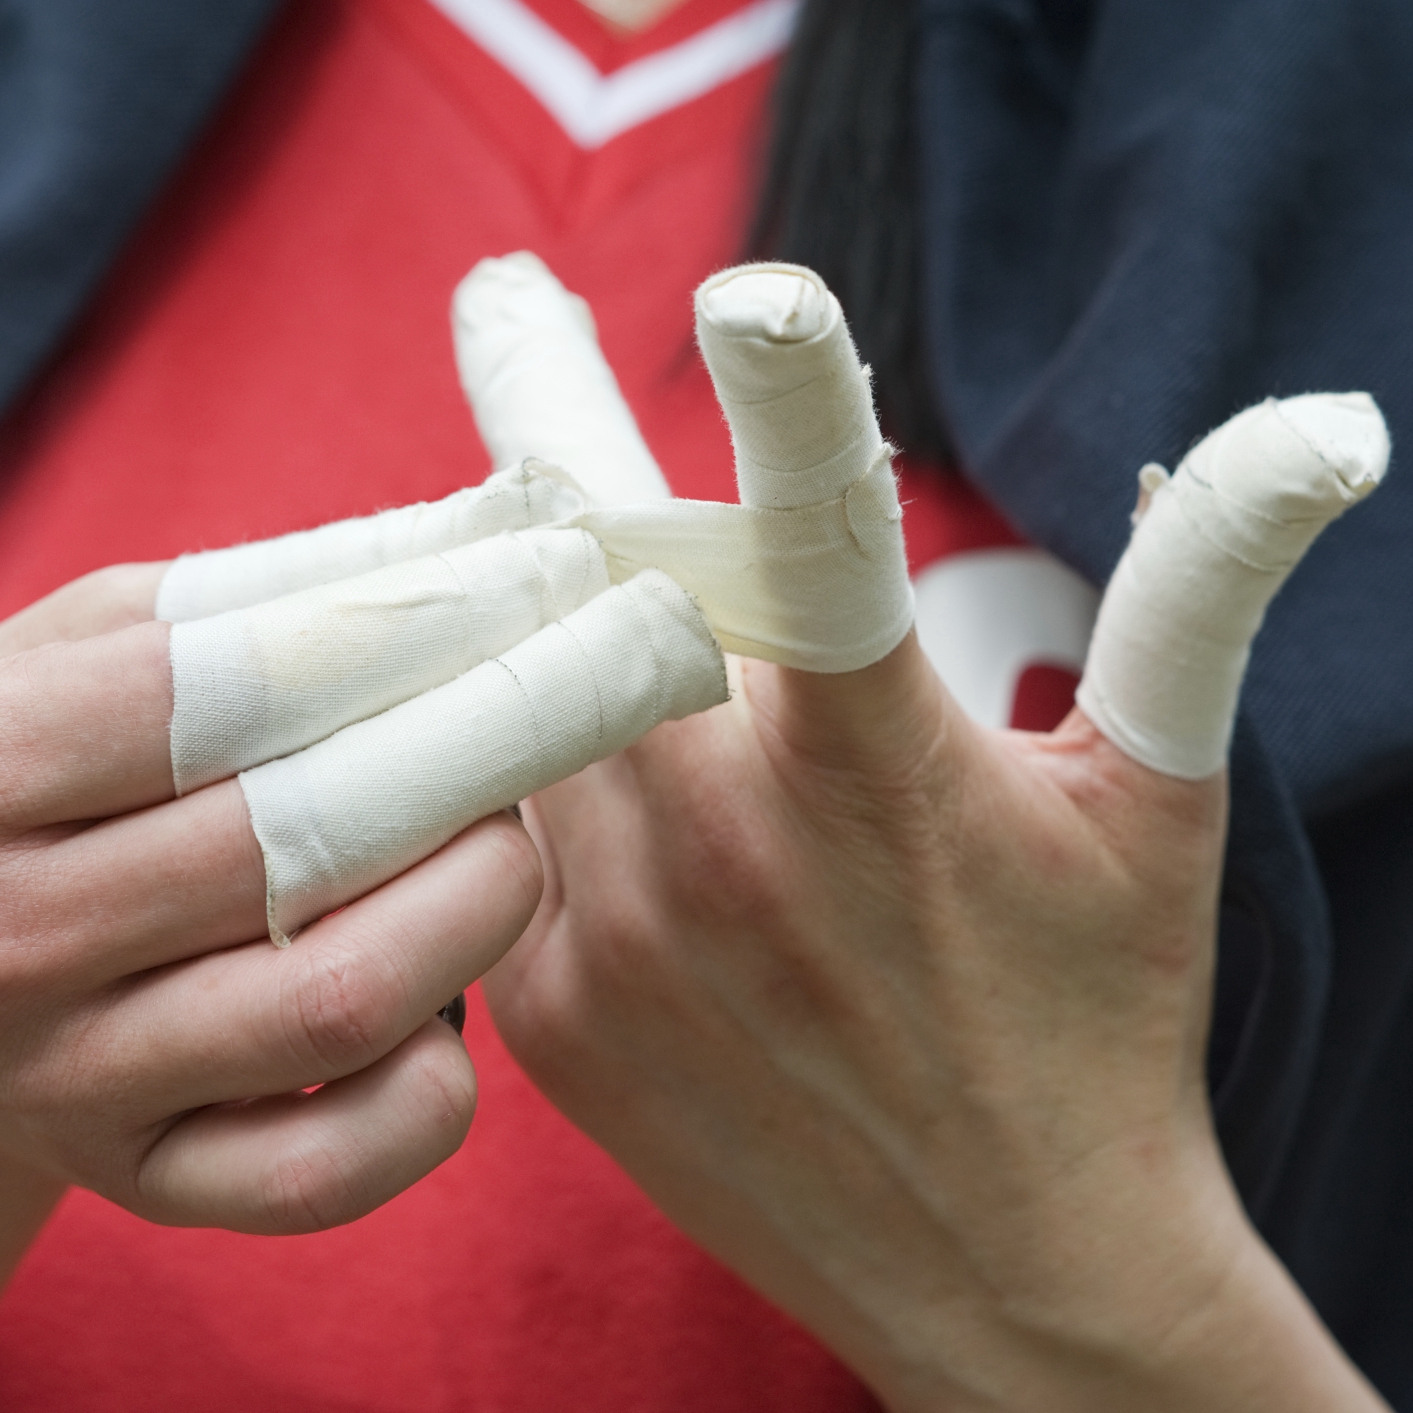 Volleyball player with taped fingers